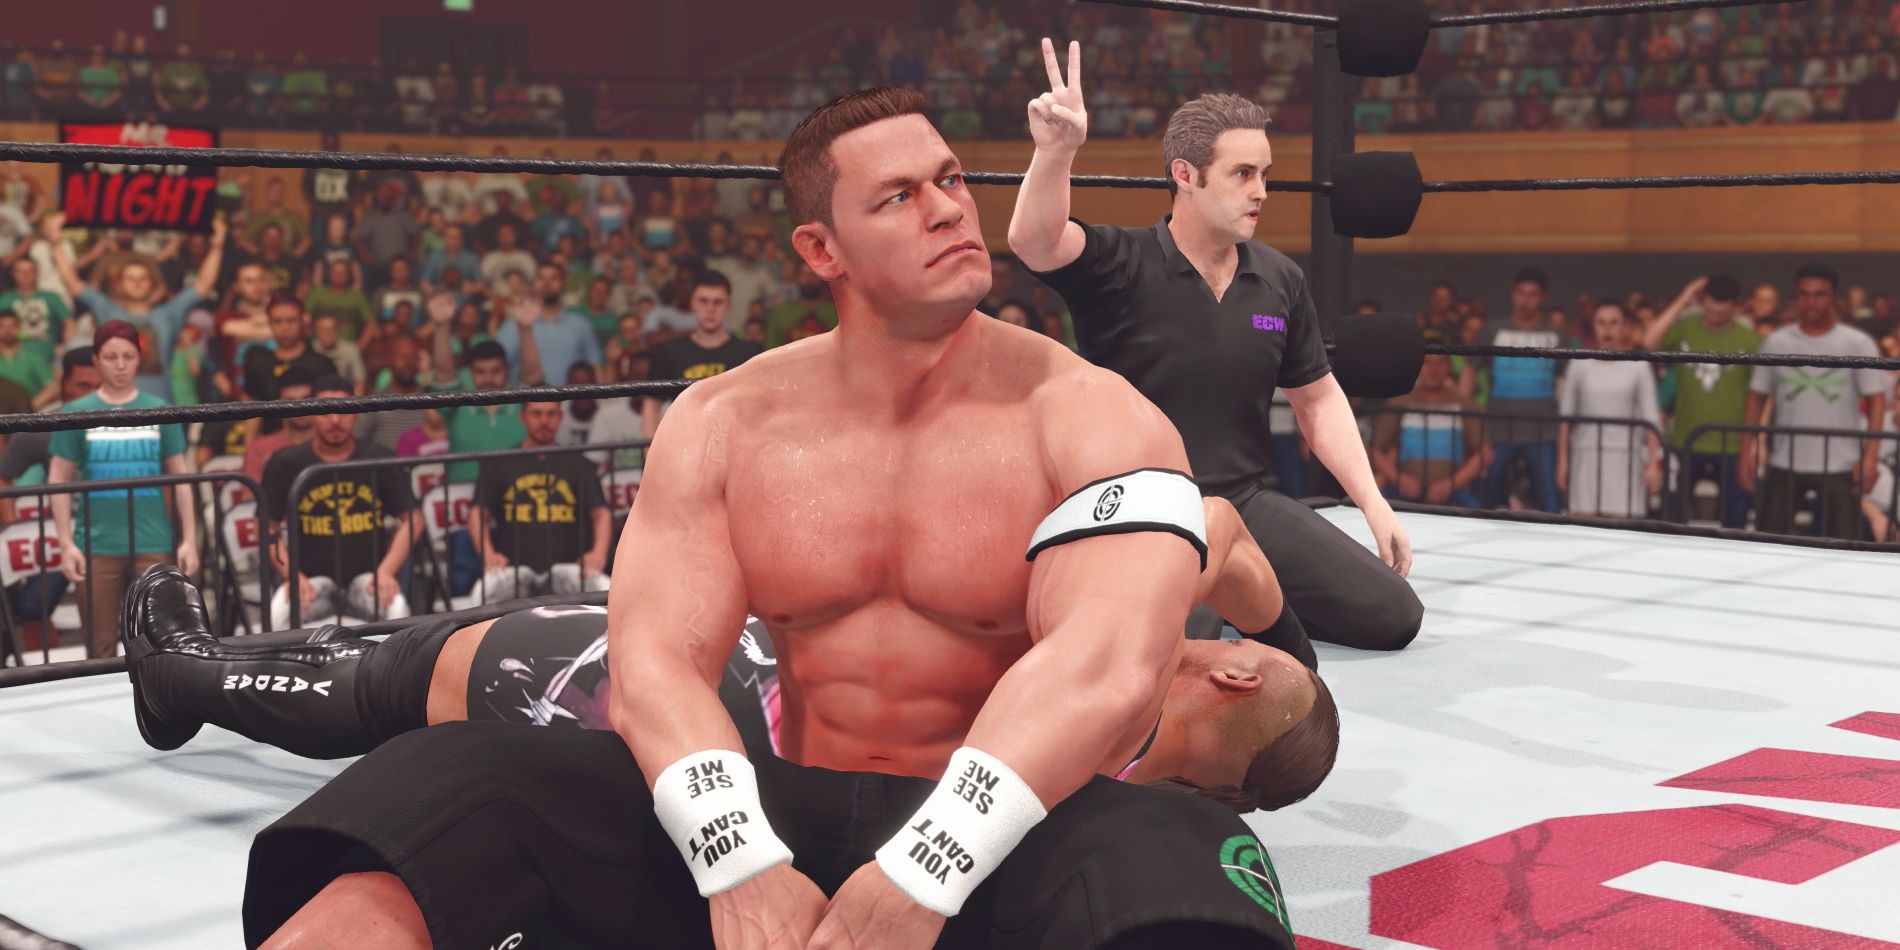 Wrestler John Cena is seen looking disappointed while in the ring with RVD after having his opponent escape a pin at the count of two. The referee is seen holding two fingers up in the background.